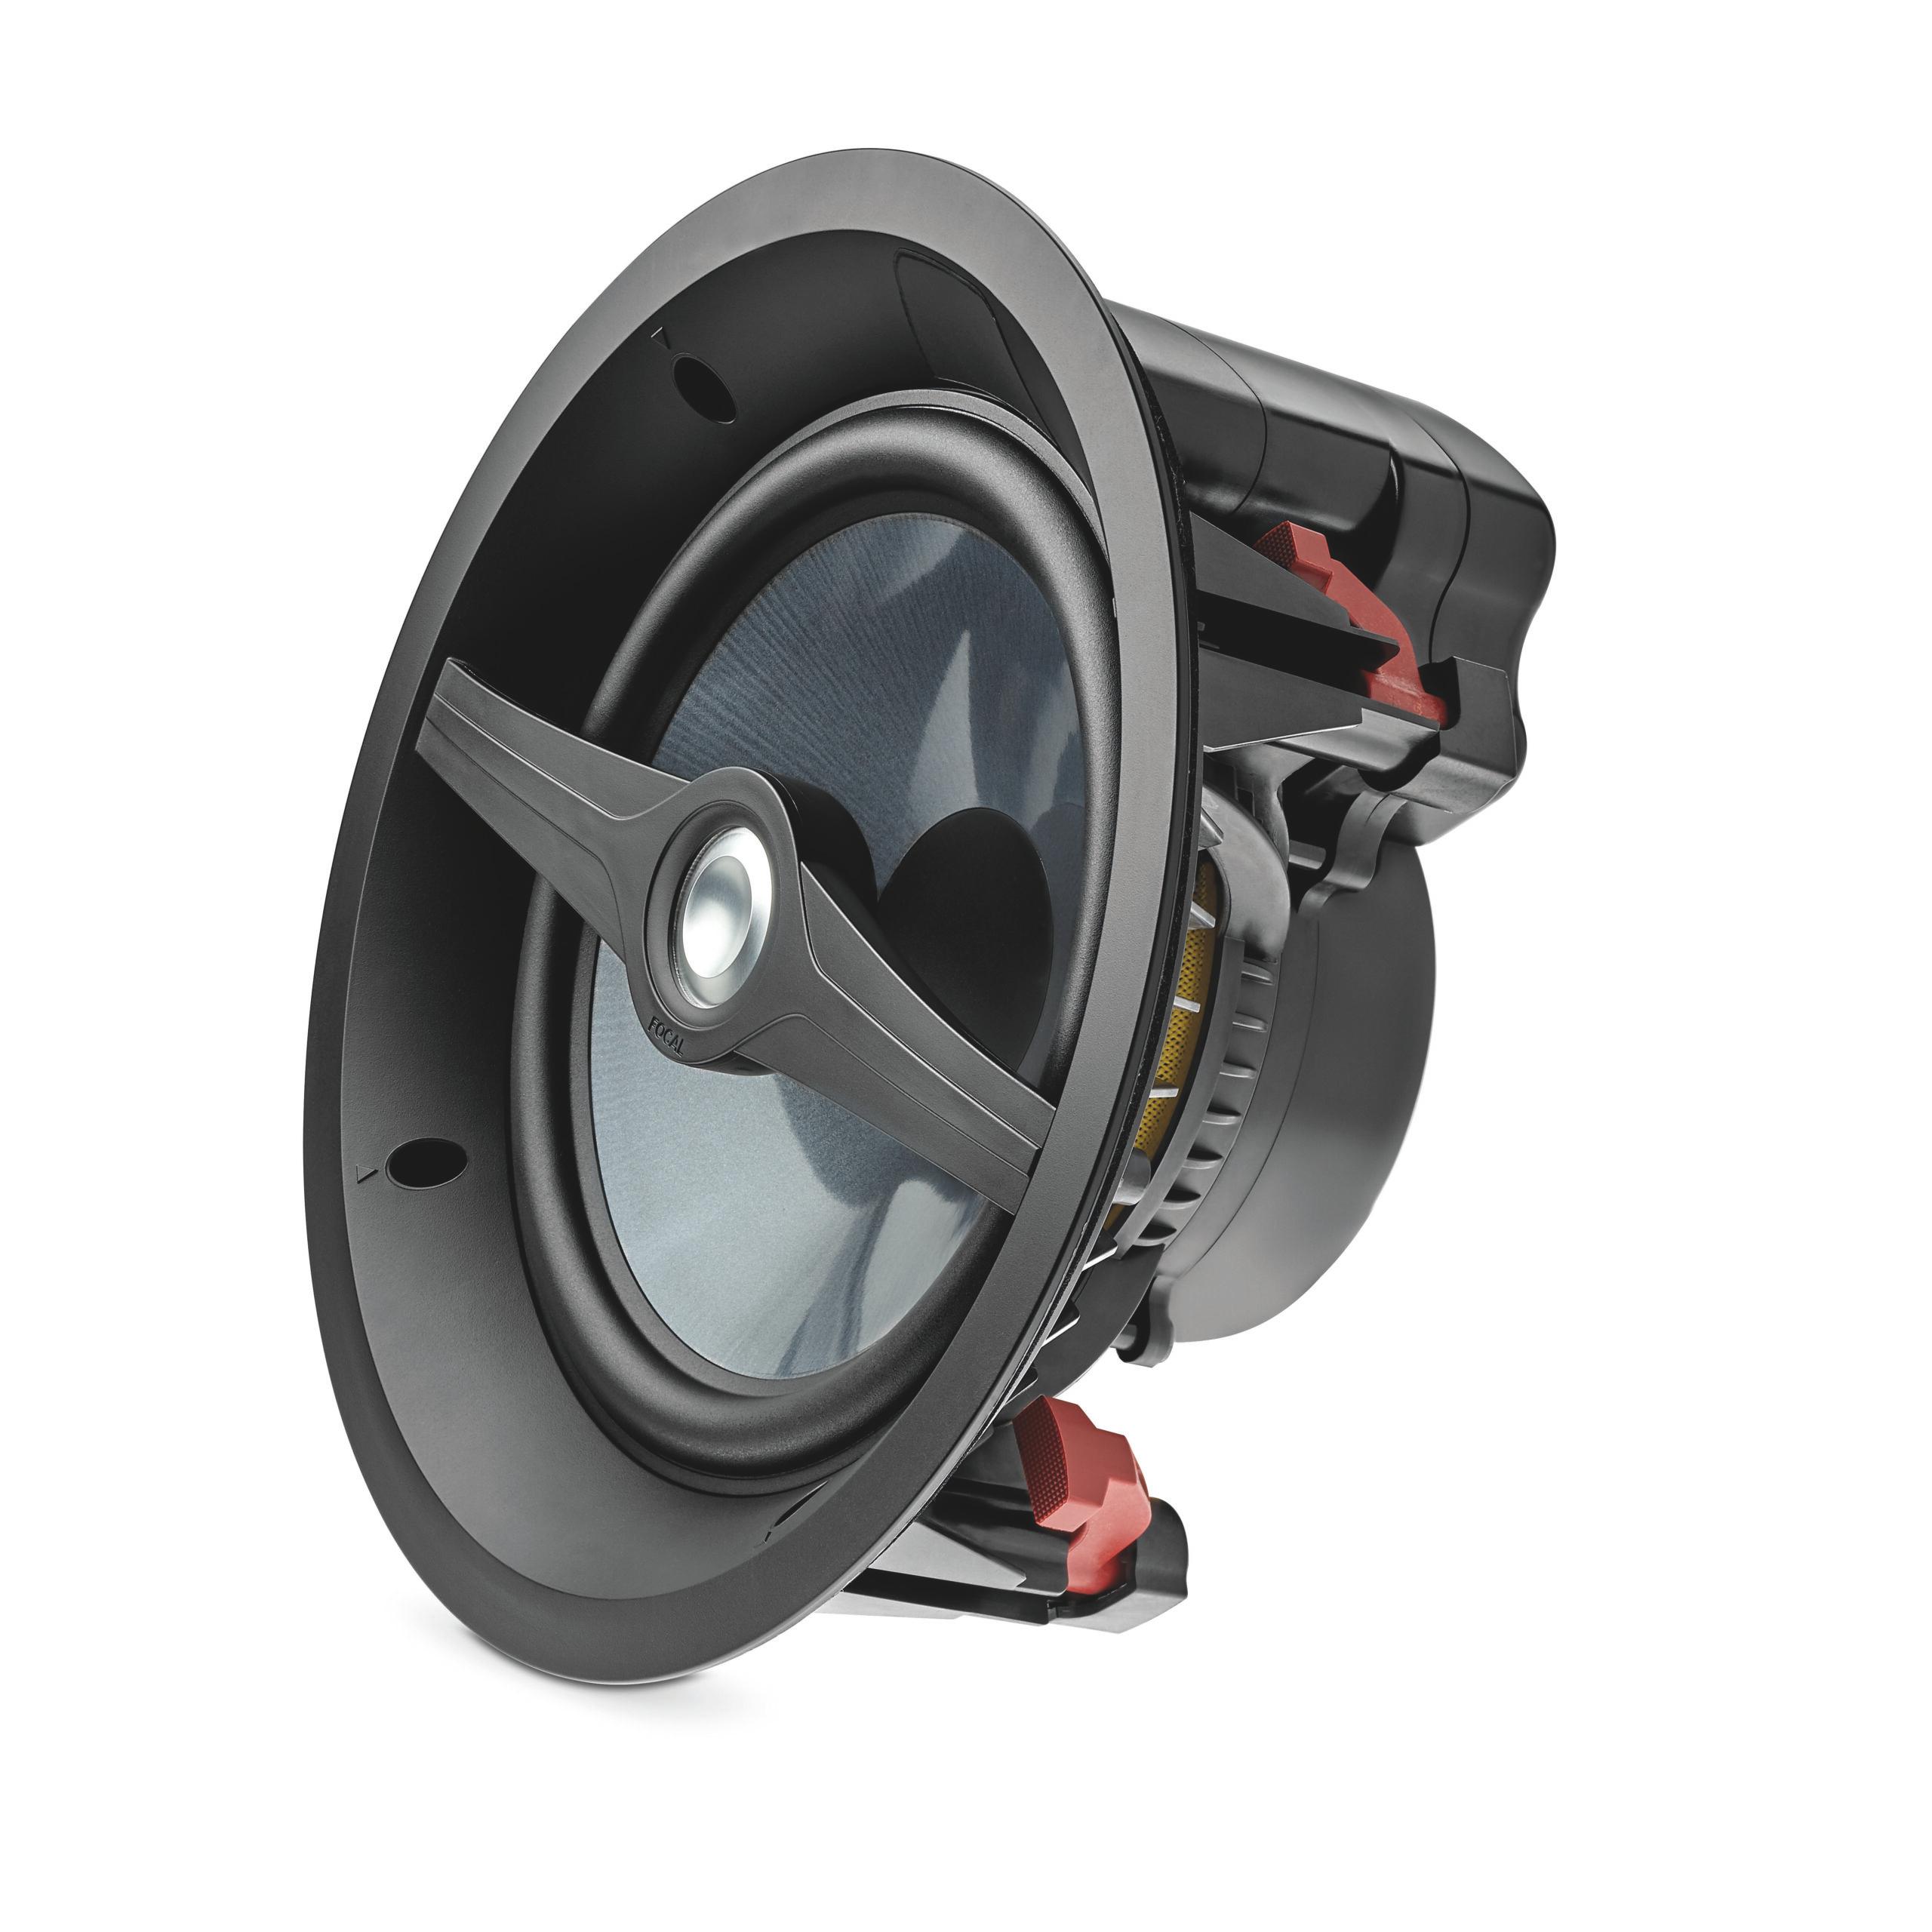 Focal's newest speaker line is designed for demanding saltwater environments, and include both full range and subwoofer models. 45d2cd38 200 icw8 littora 34 prof scaled